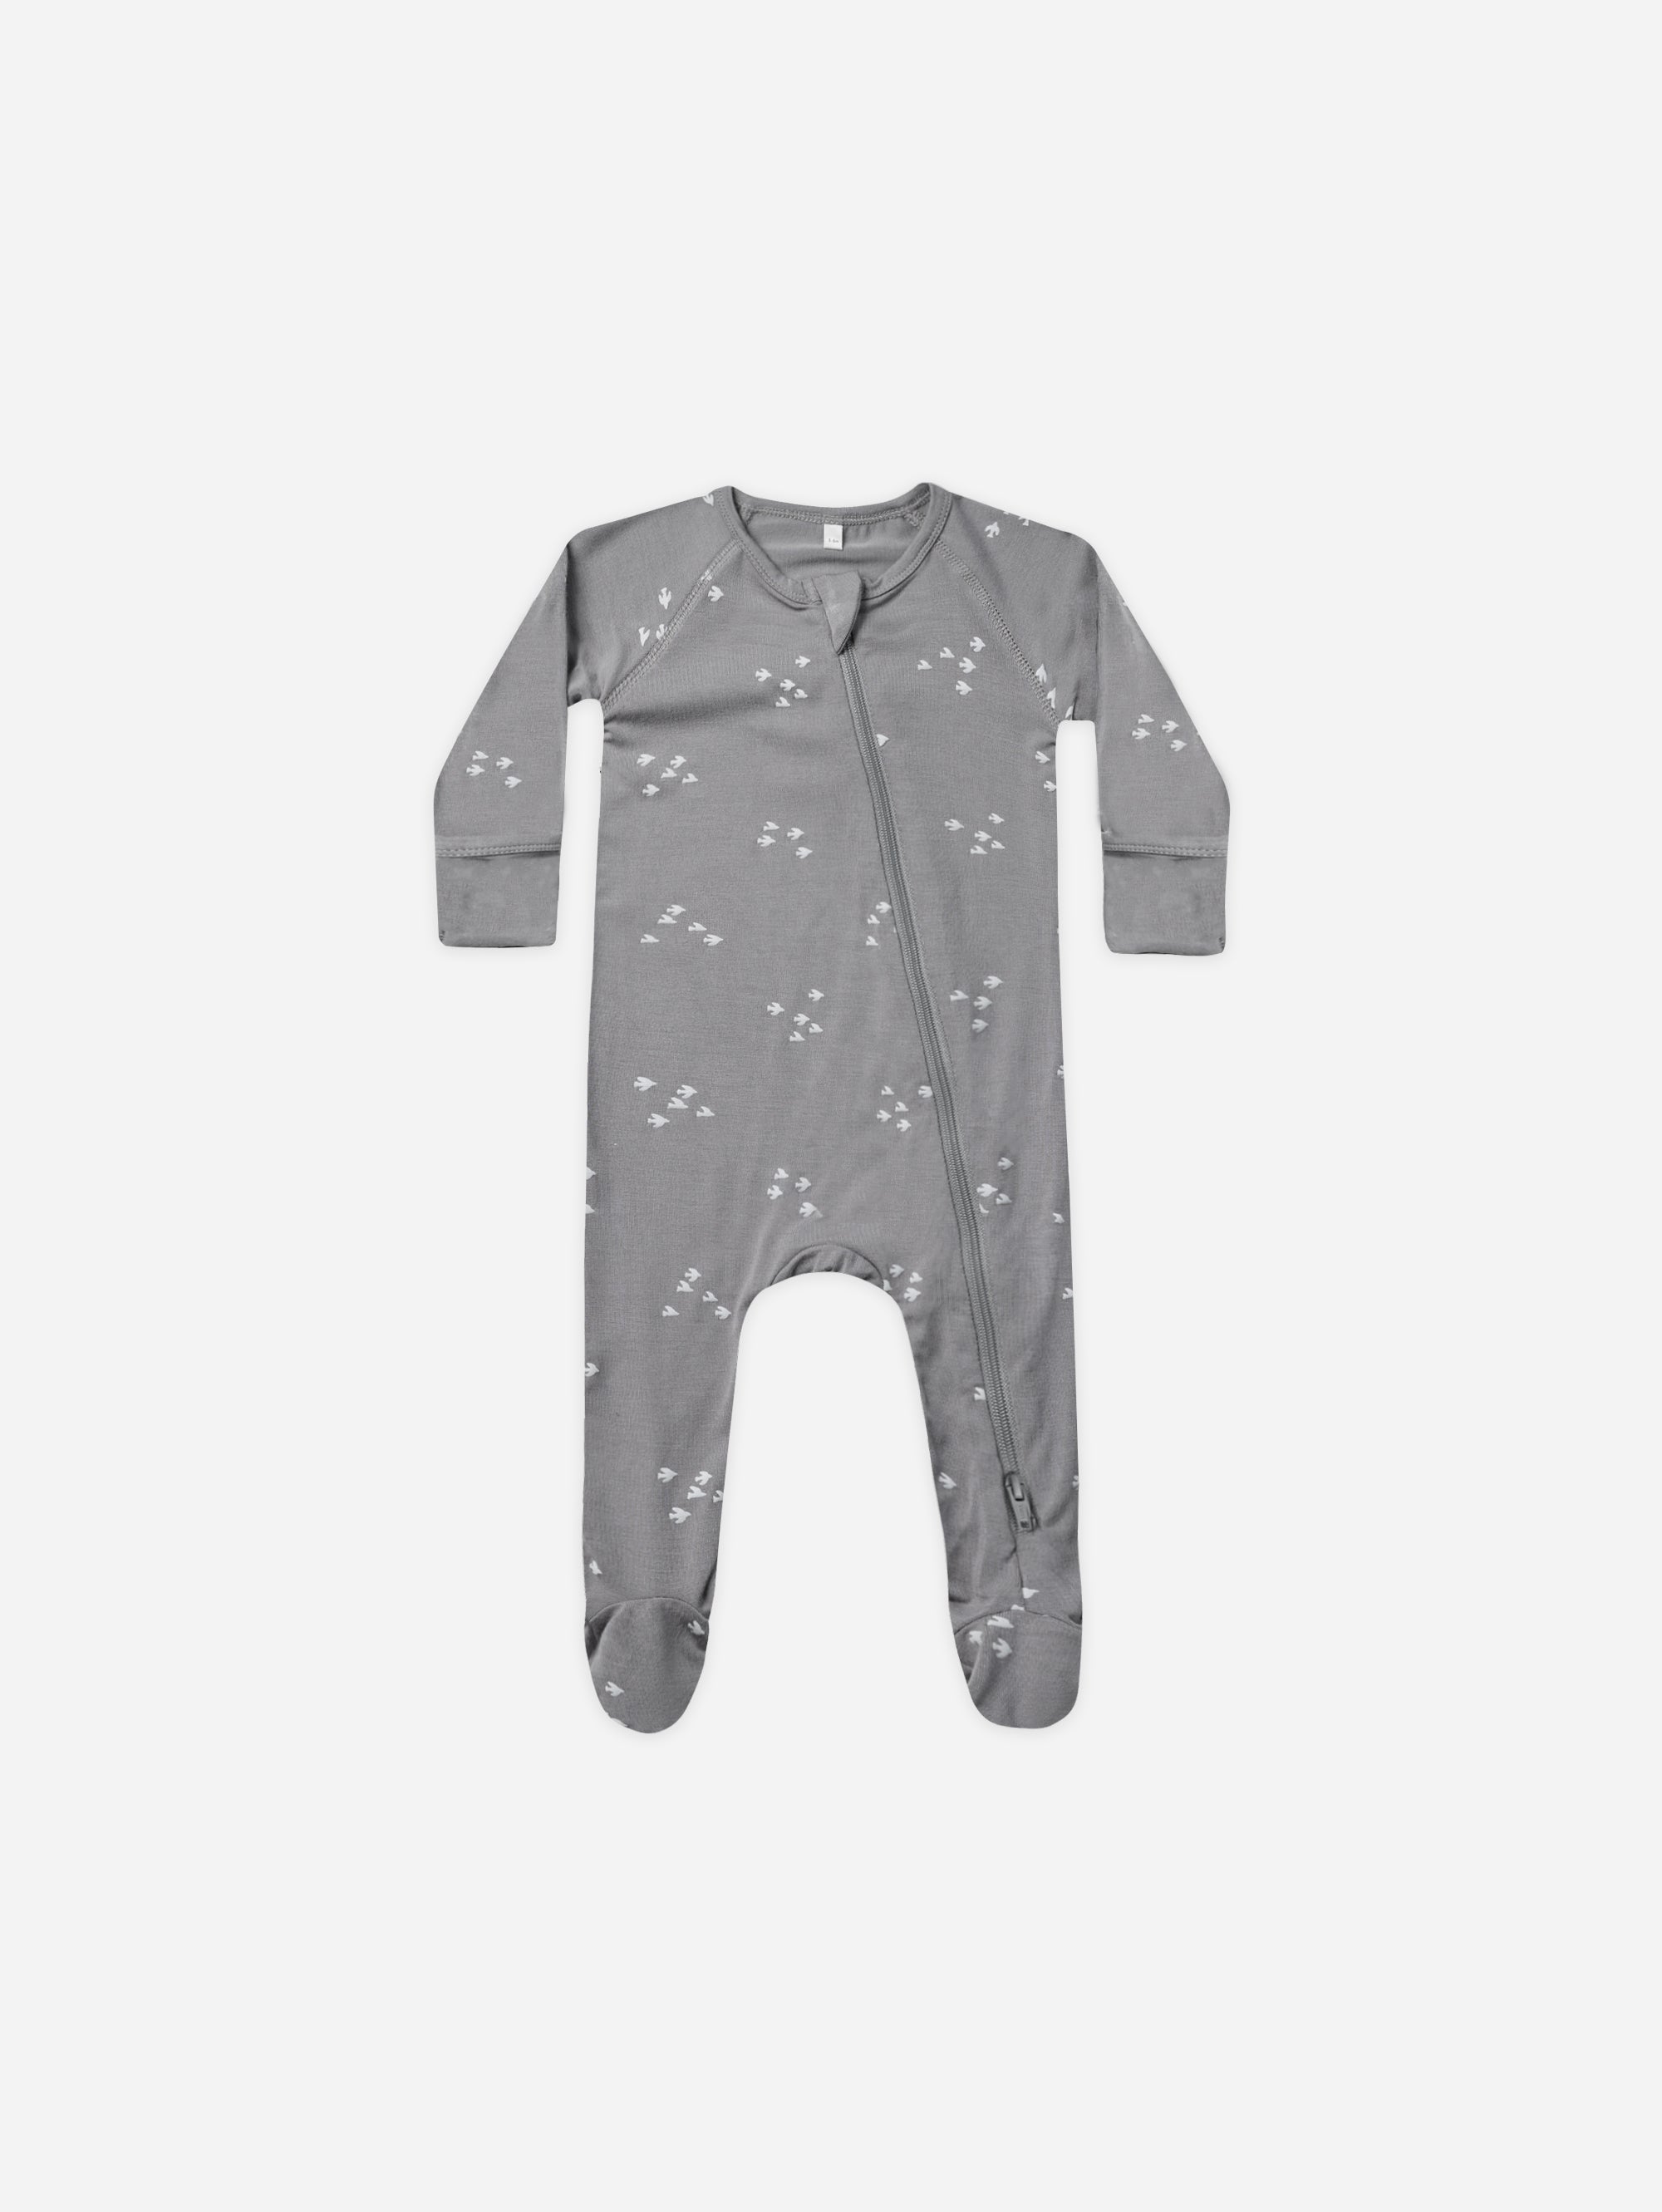 Bamboo Zip Footie || Flock - Rylee + Cru | Kids Clothes | Trendy Baby Clothes | Modern Infant Outfits |